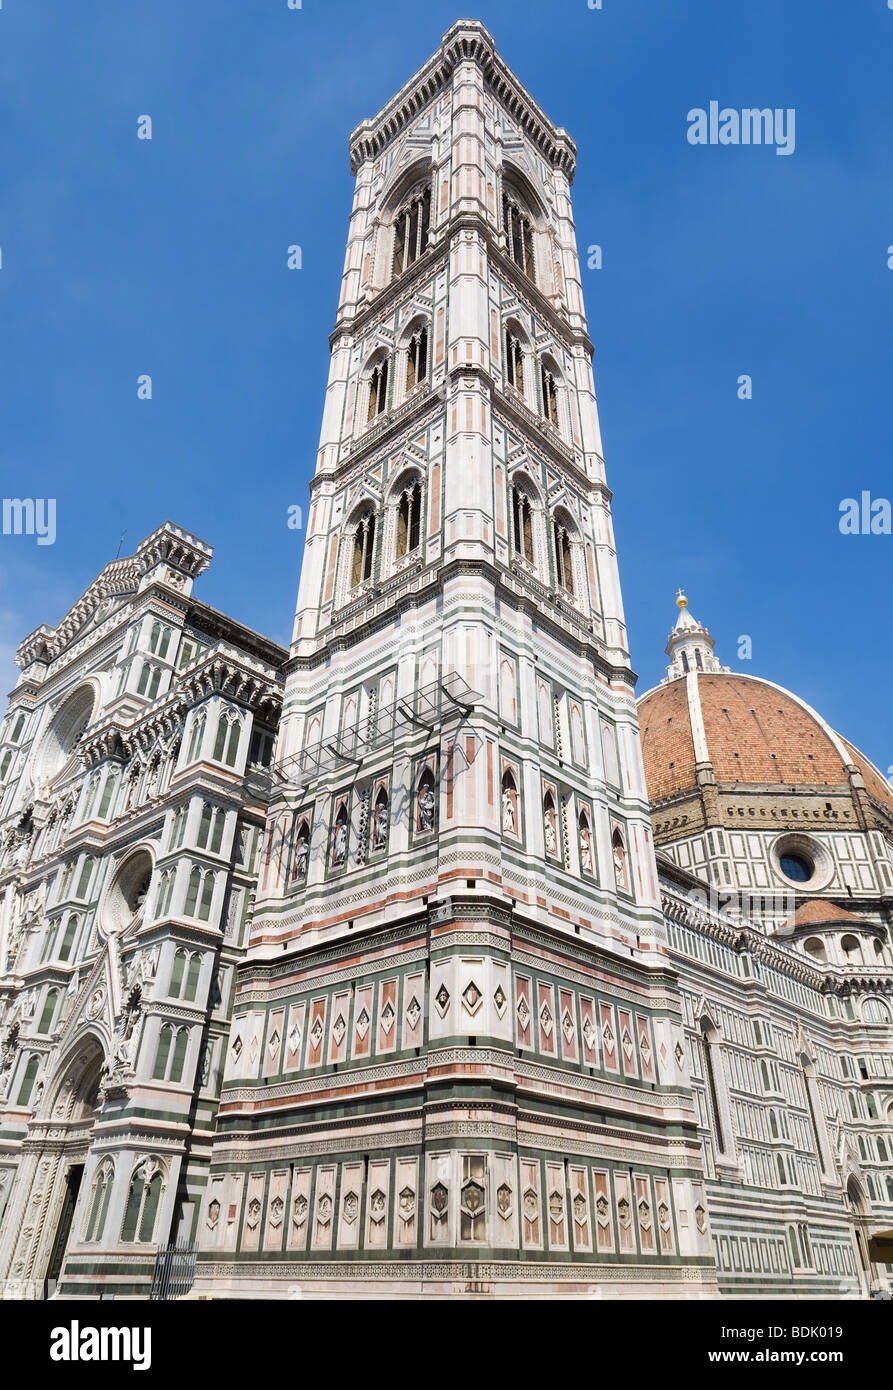 Duomo cathedral in Florence Italy. Stock Photo